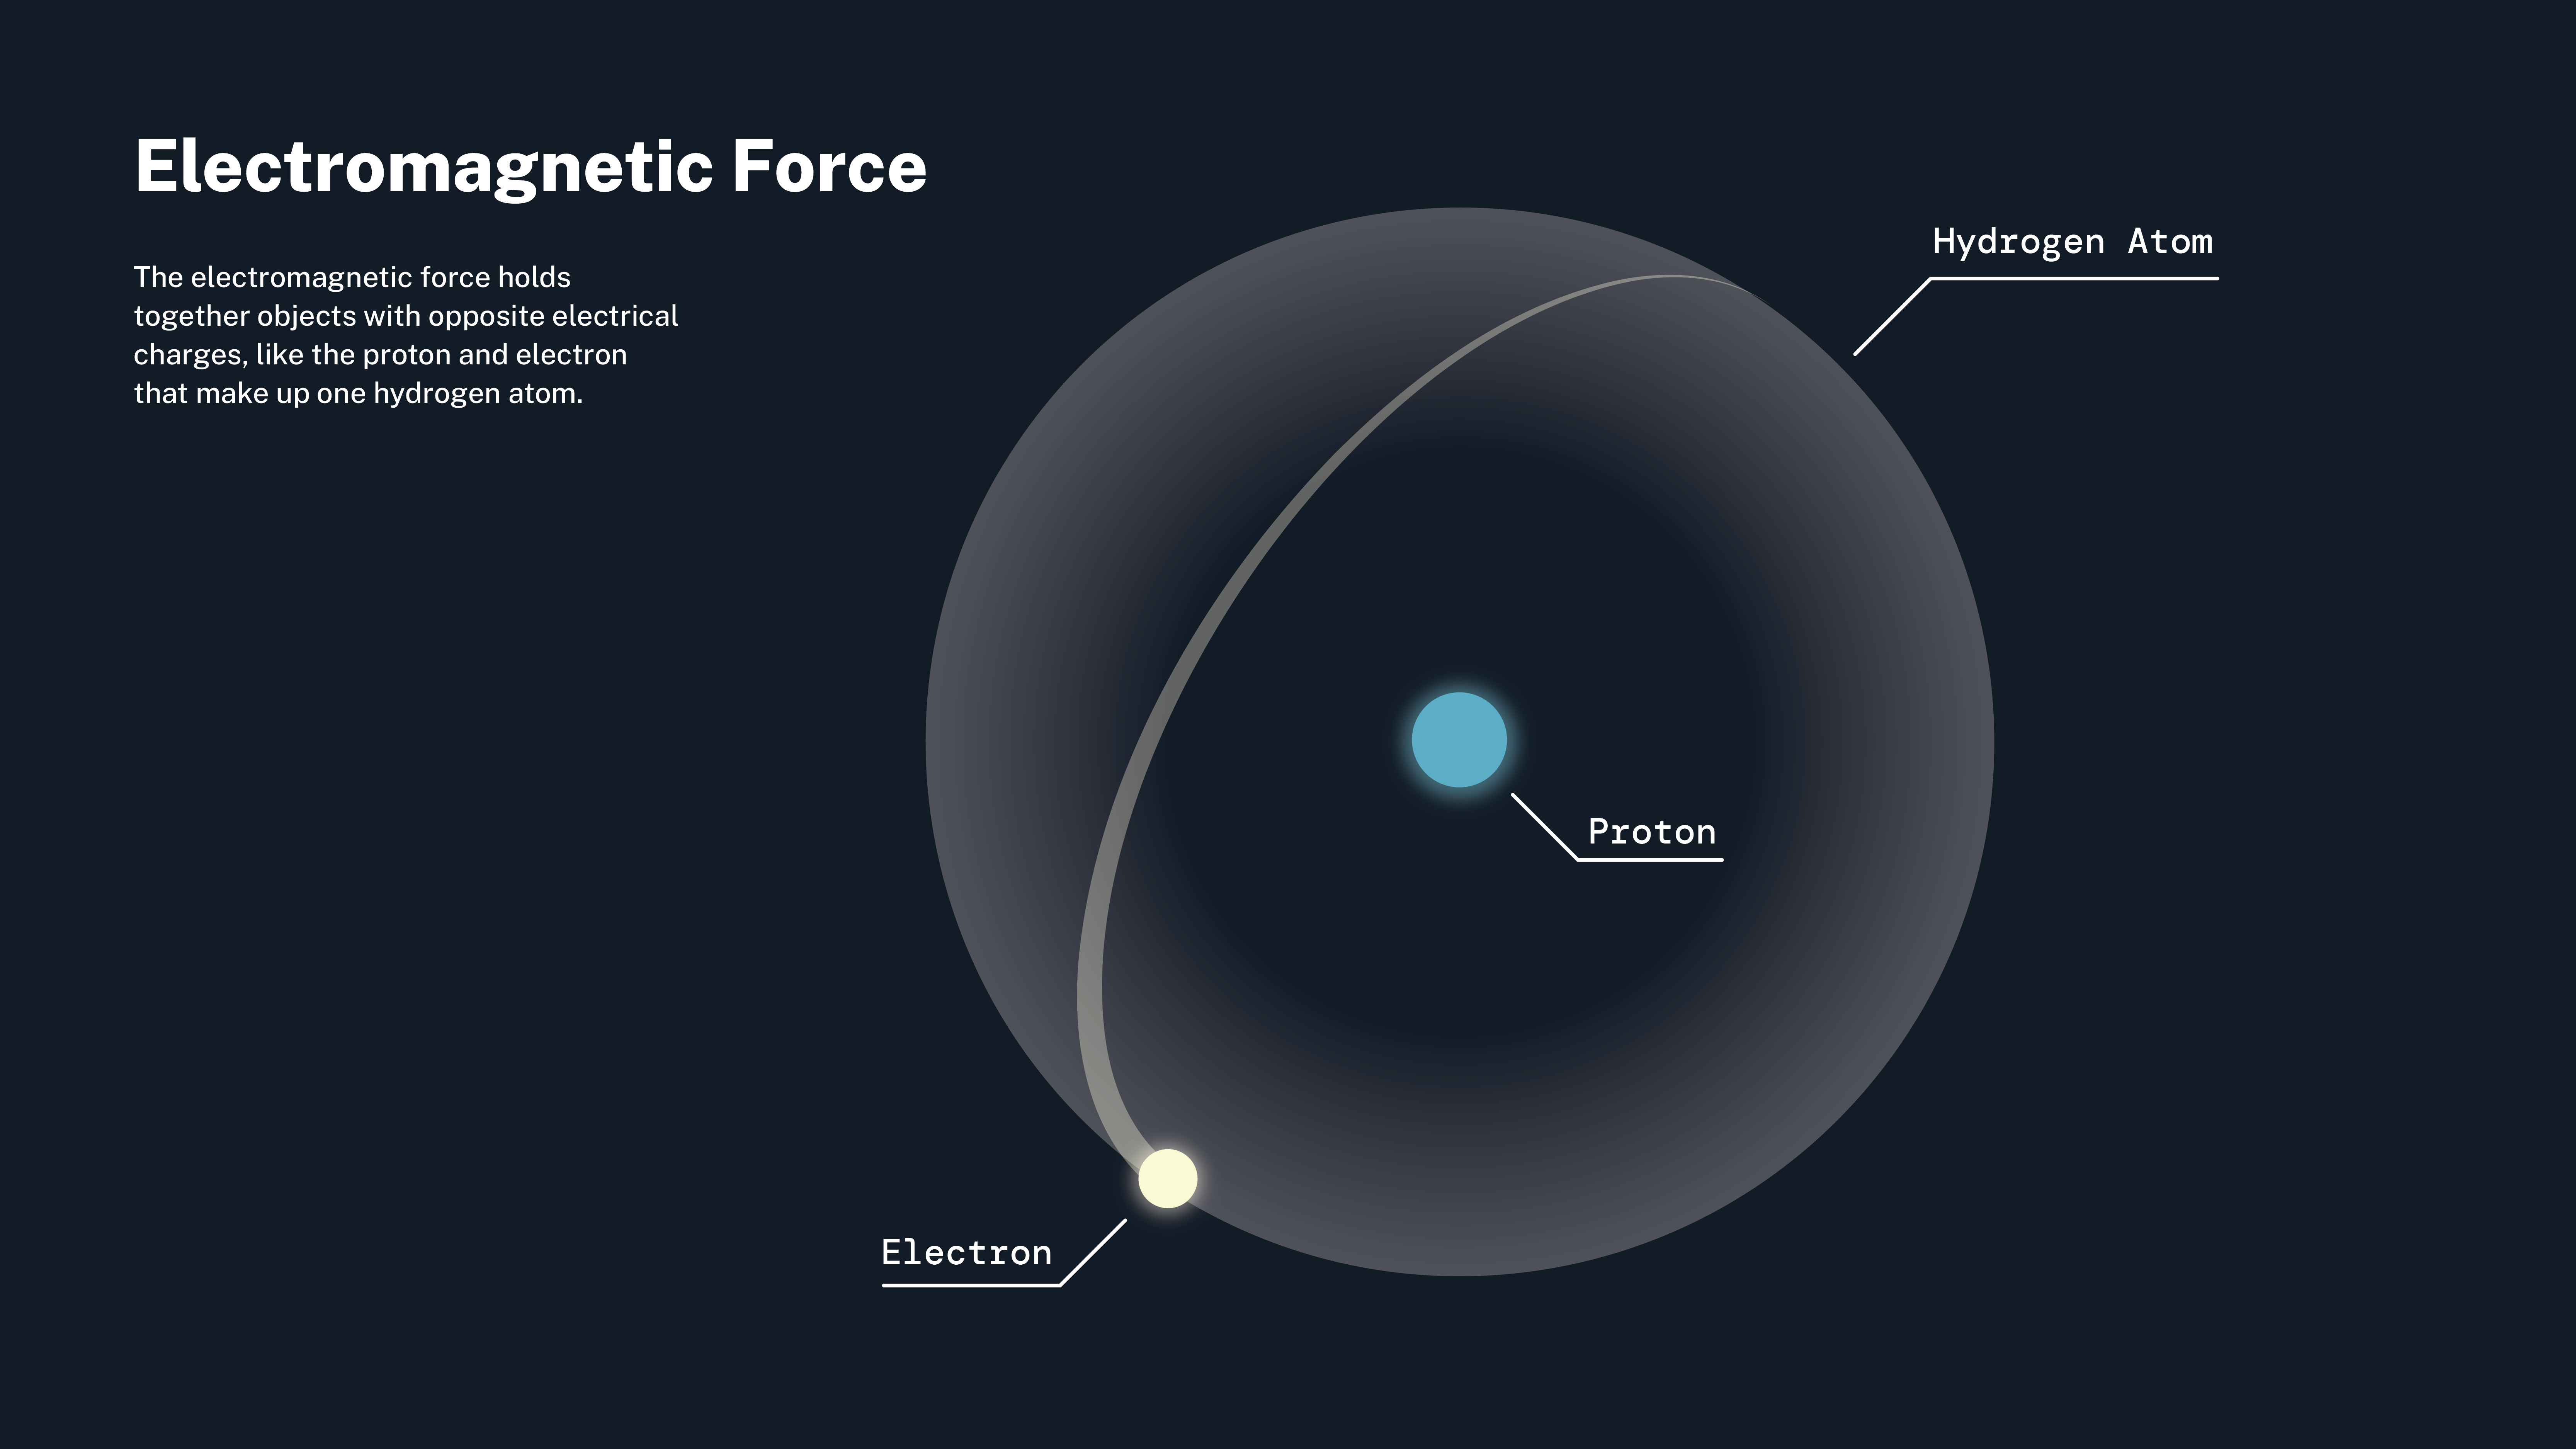 This infographic is done mostly in shades of blue. At the top left is the title: "Electromagnetic Force." Below that is a block of text that reads: "The electromagnetic force holds together objects with opposite electrical charges, like the proton and electron that make up one hydrogen atom." Below and to the right of the text is an illustration of a hydrogen atom. A blue circle representing a proton sits in the middle of a larger, transparent white circle. A yellow electron is orbiting the proton, illustrated by a streak of yellow trailing the proton across the top of the white circle.